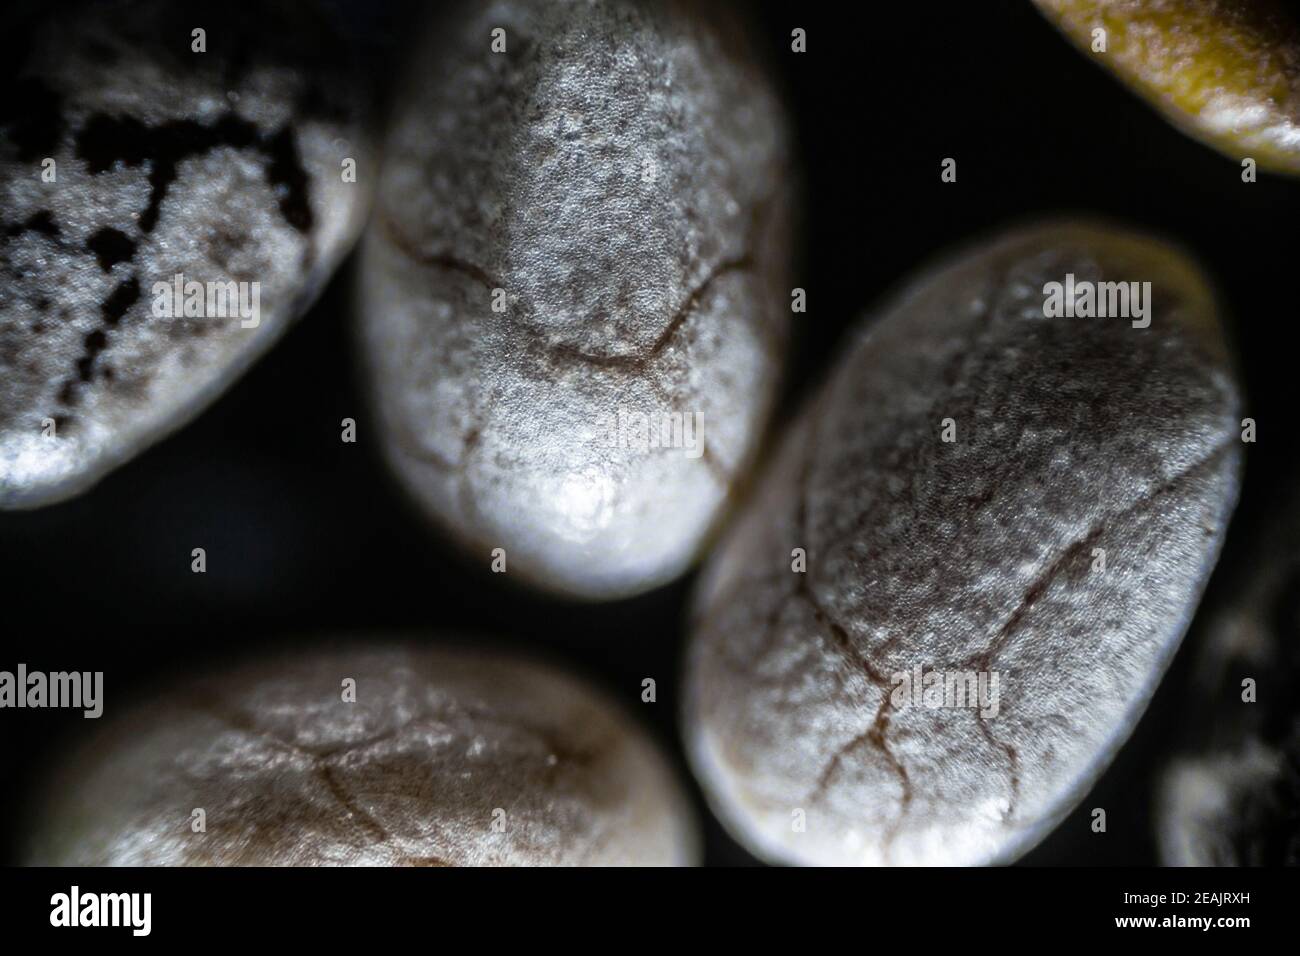 Chia seeds close up under the light microscope, magnification 40 times Stock Photo